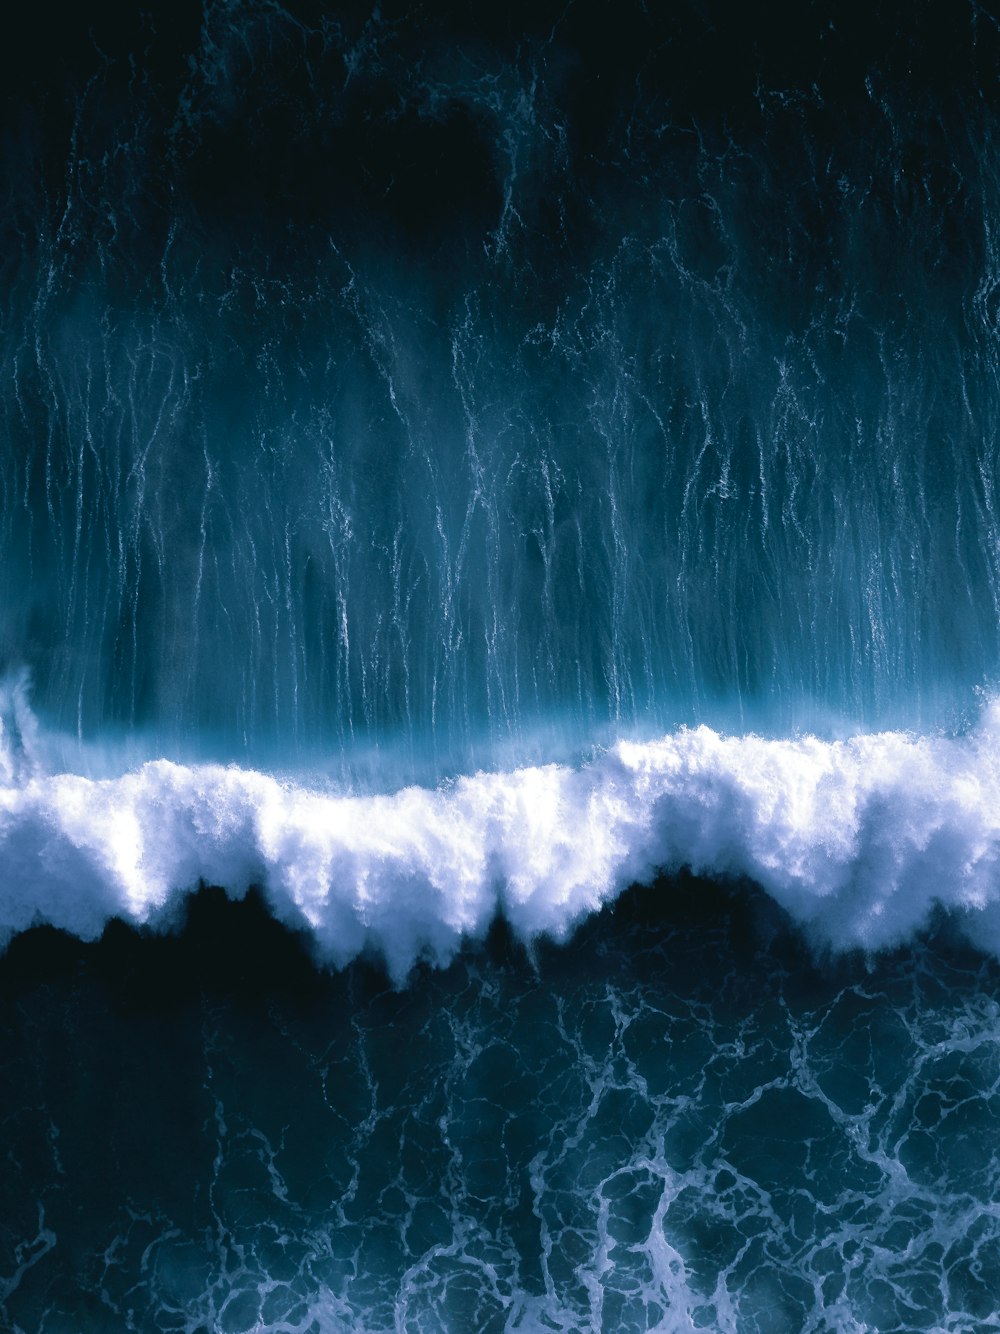 water waves on black textile